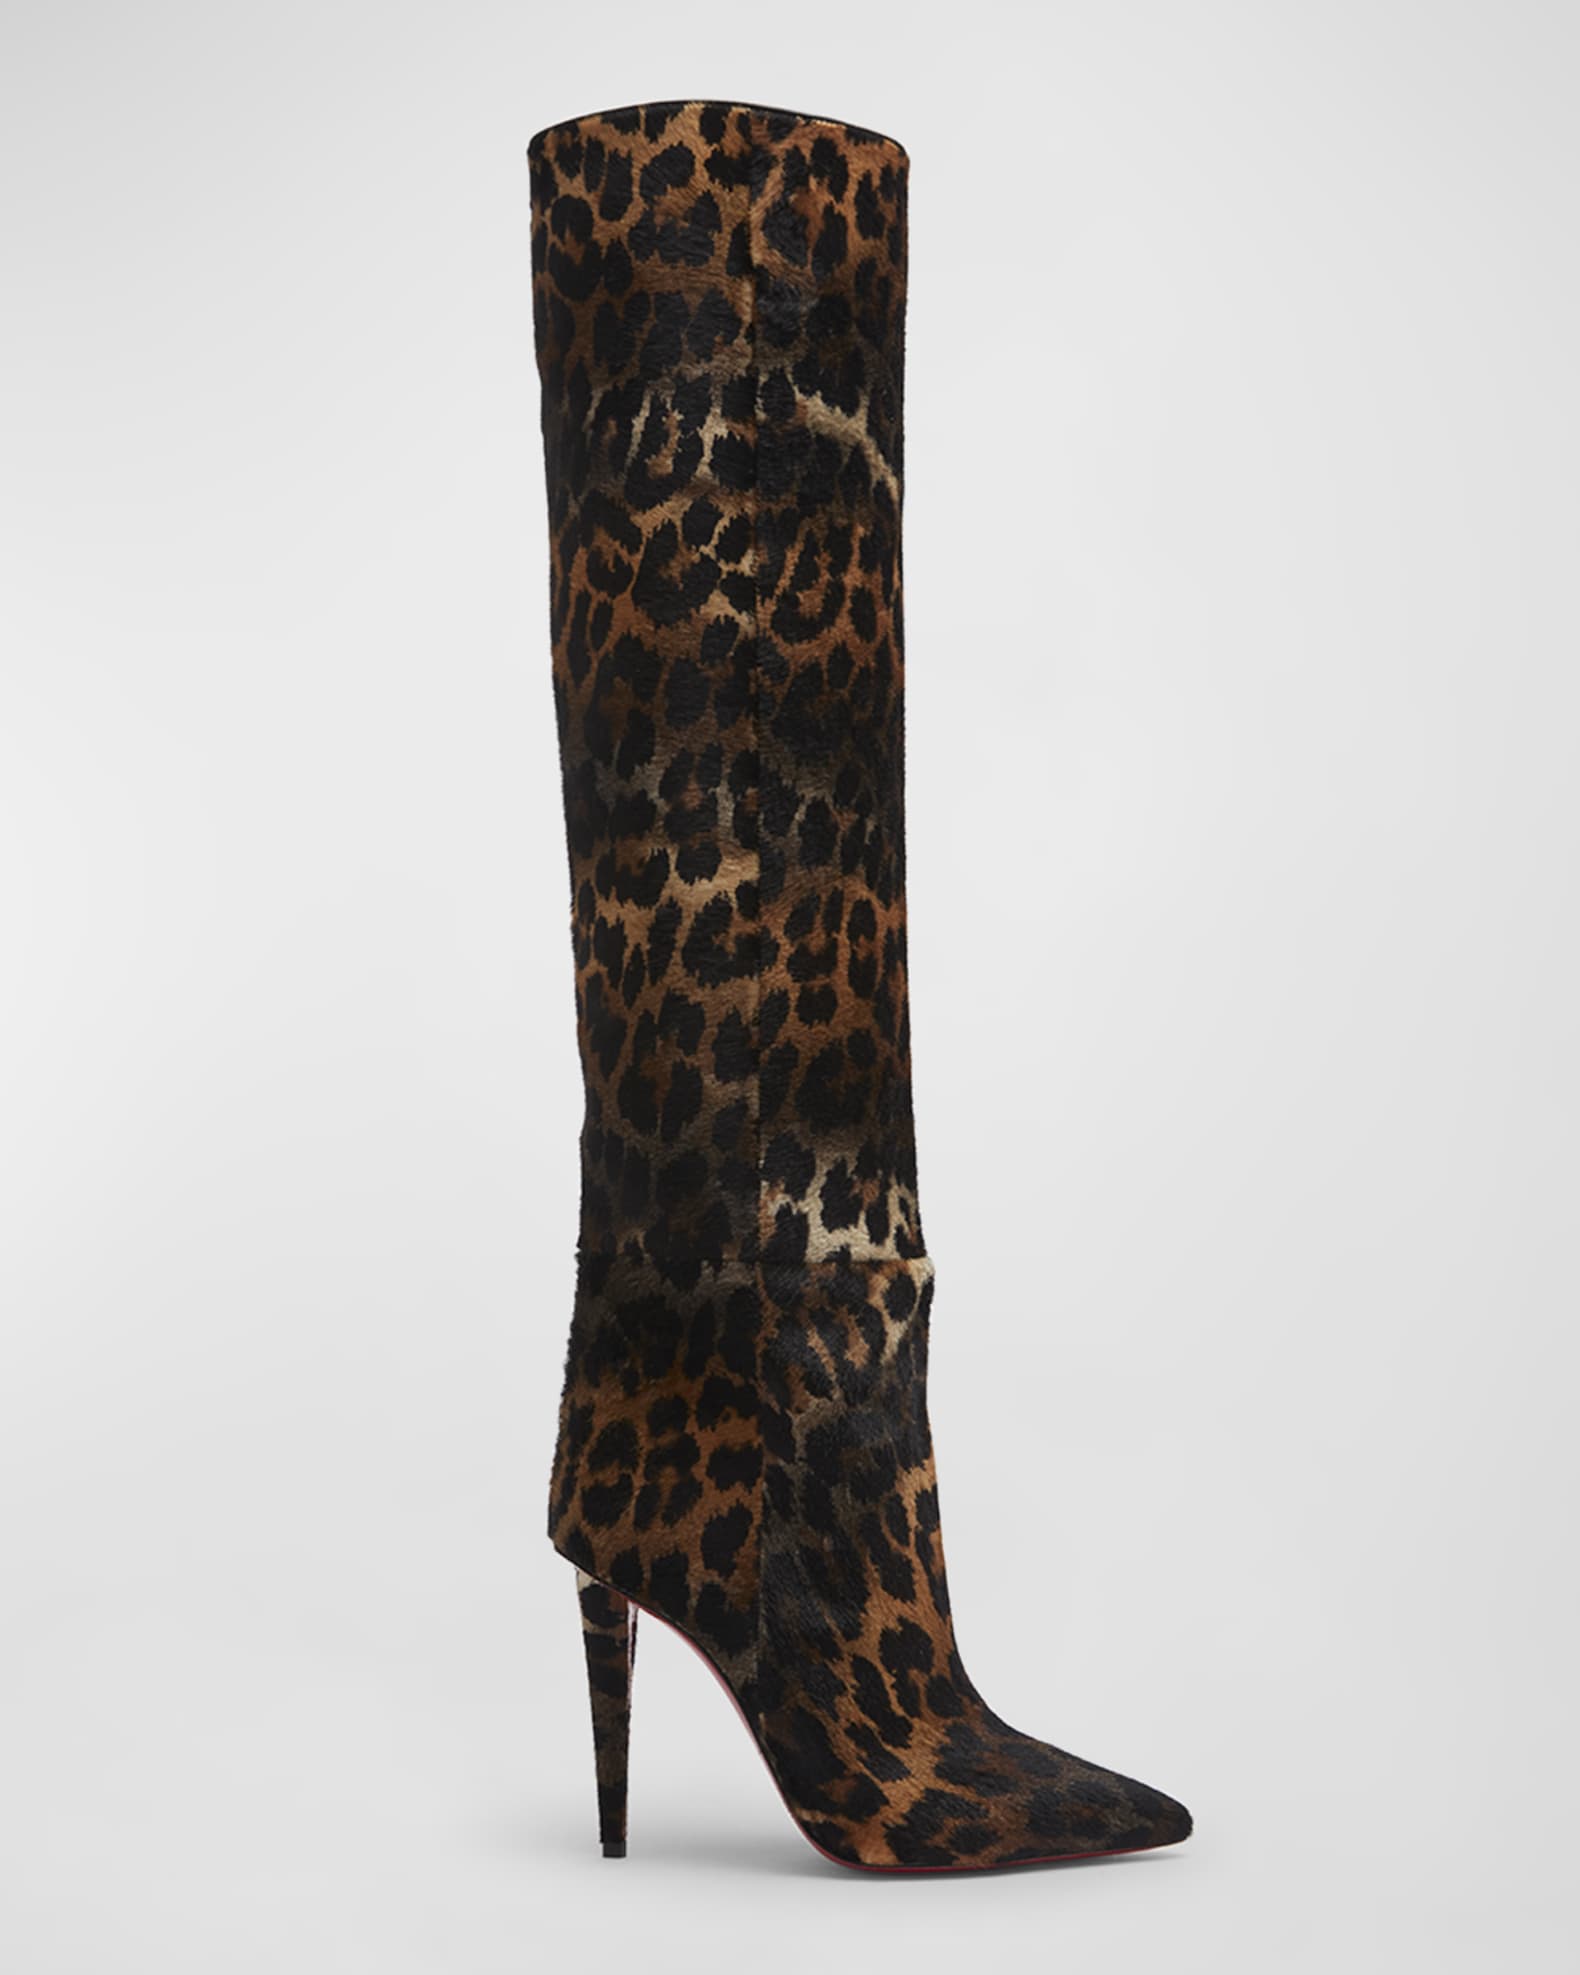 Christian Louboutin Astrilarge Botta Red Sole Leopard Suede Knee-High Boots Brown/Black